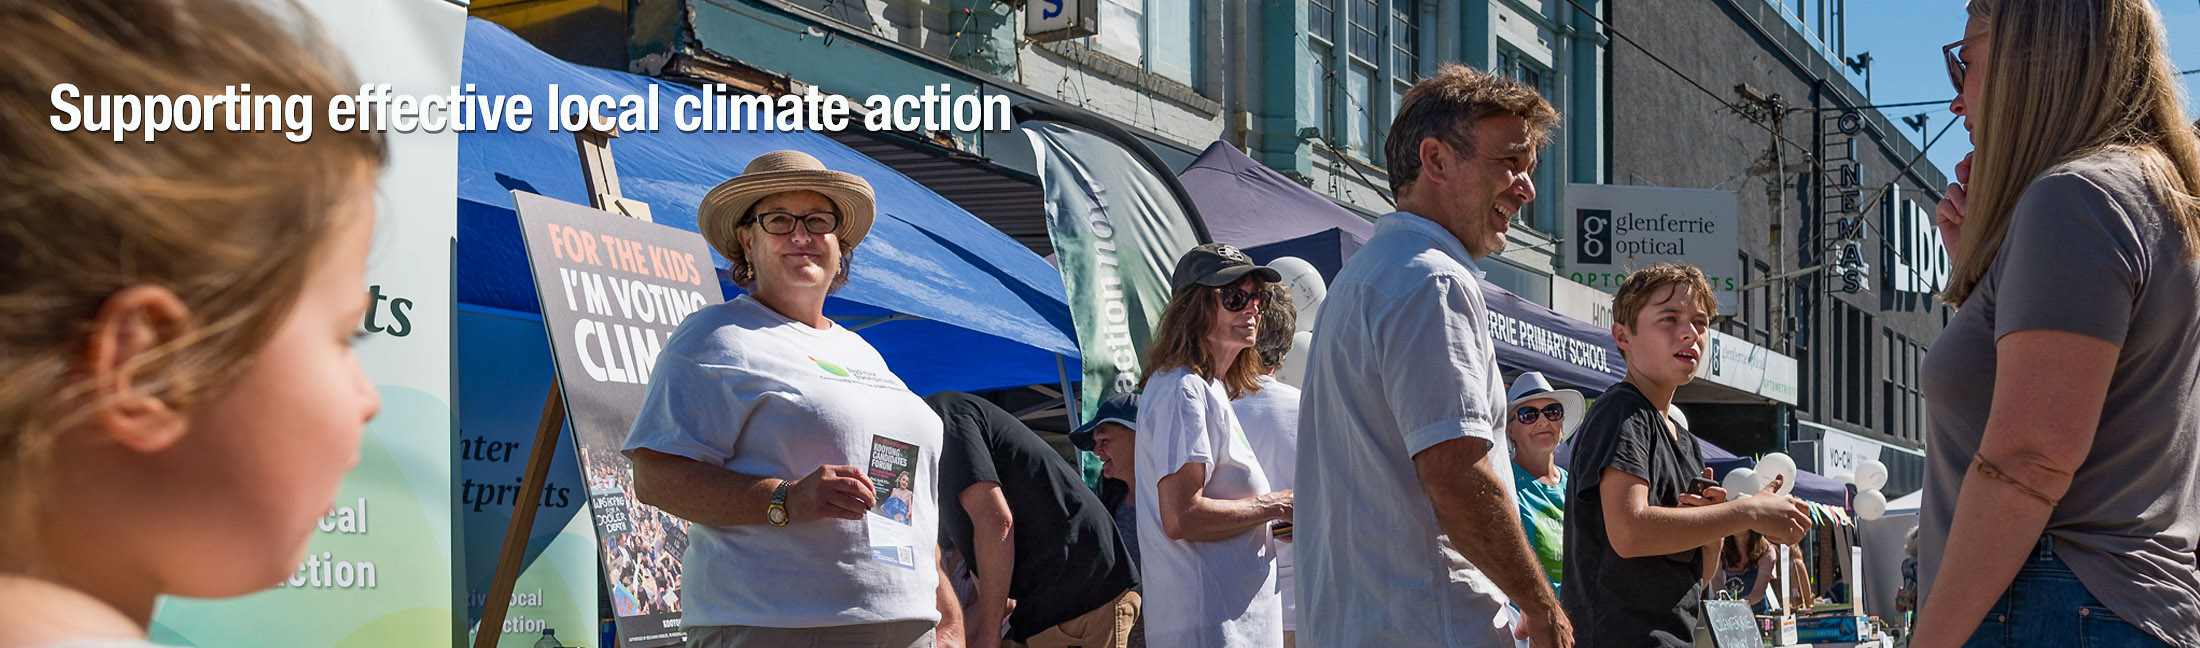 Donate to support effective local climate action